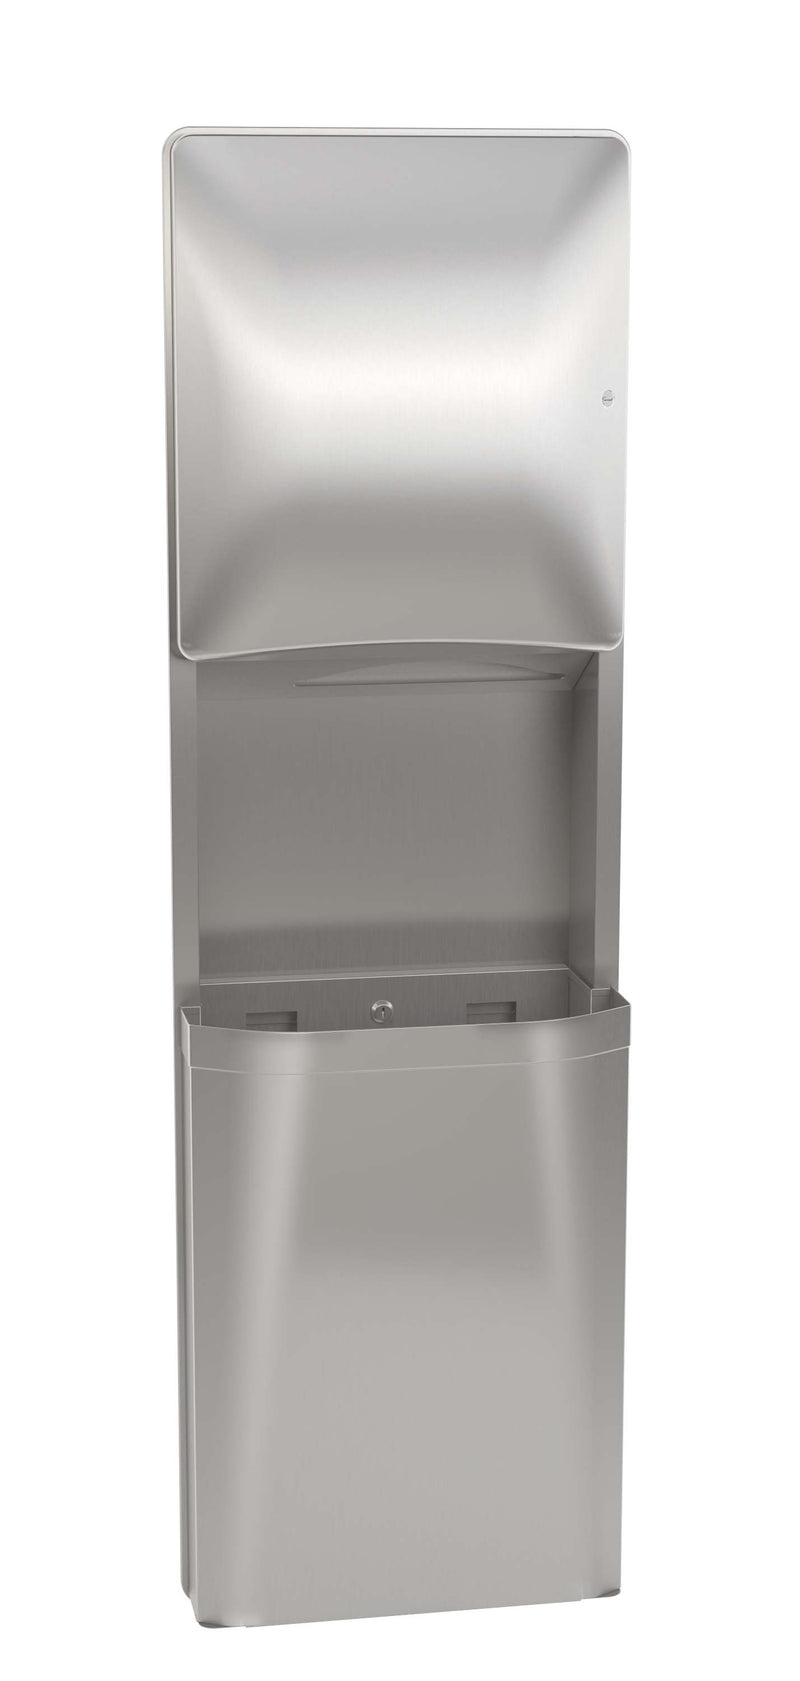 Bradley 2A25-1136 Paper Towel Dispenser Waste Receptacle Unit, Surface Mounted